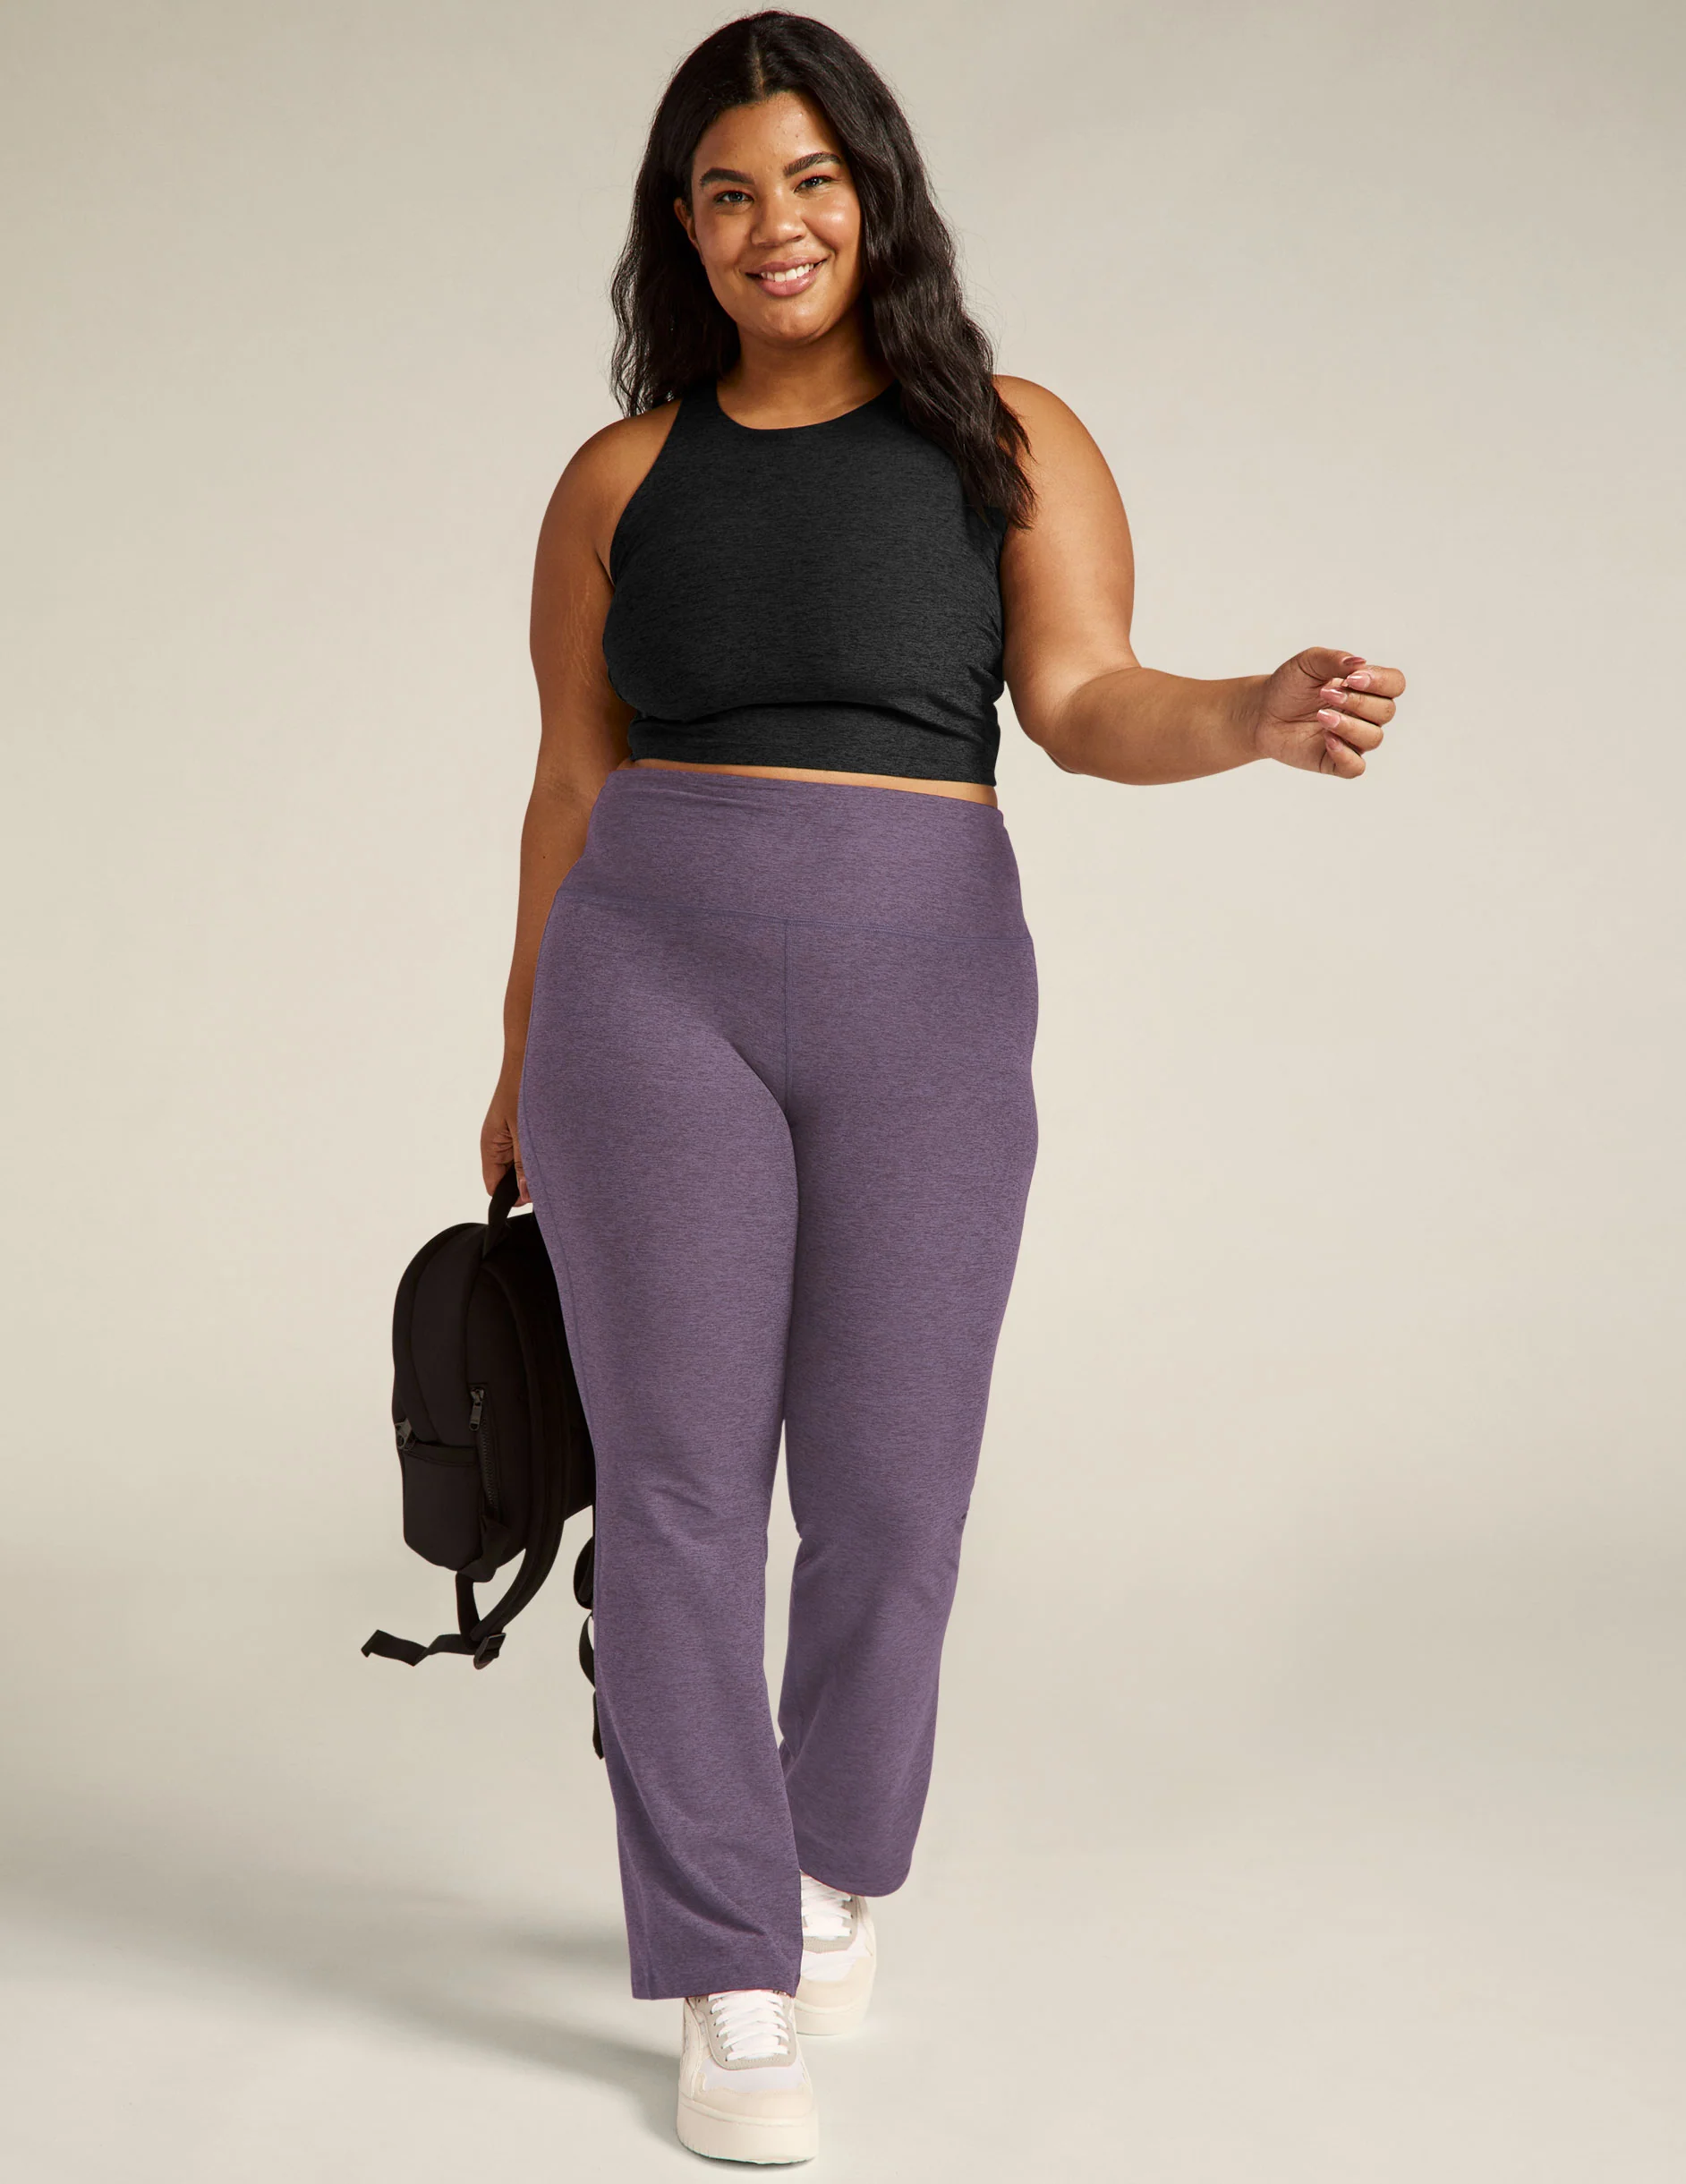 40 of the Best Plus-Size Fitness Brands You Need to Know